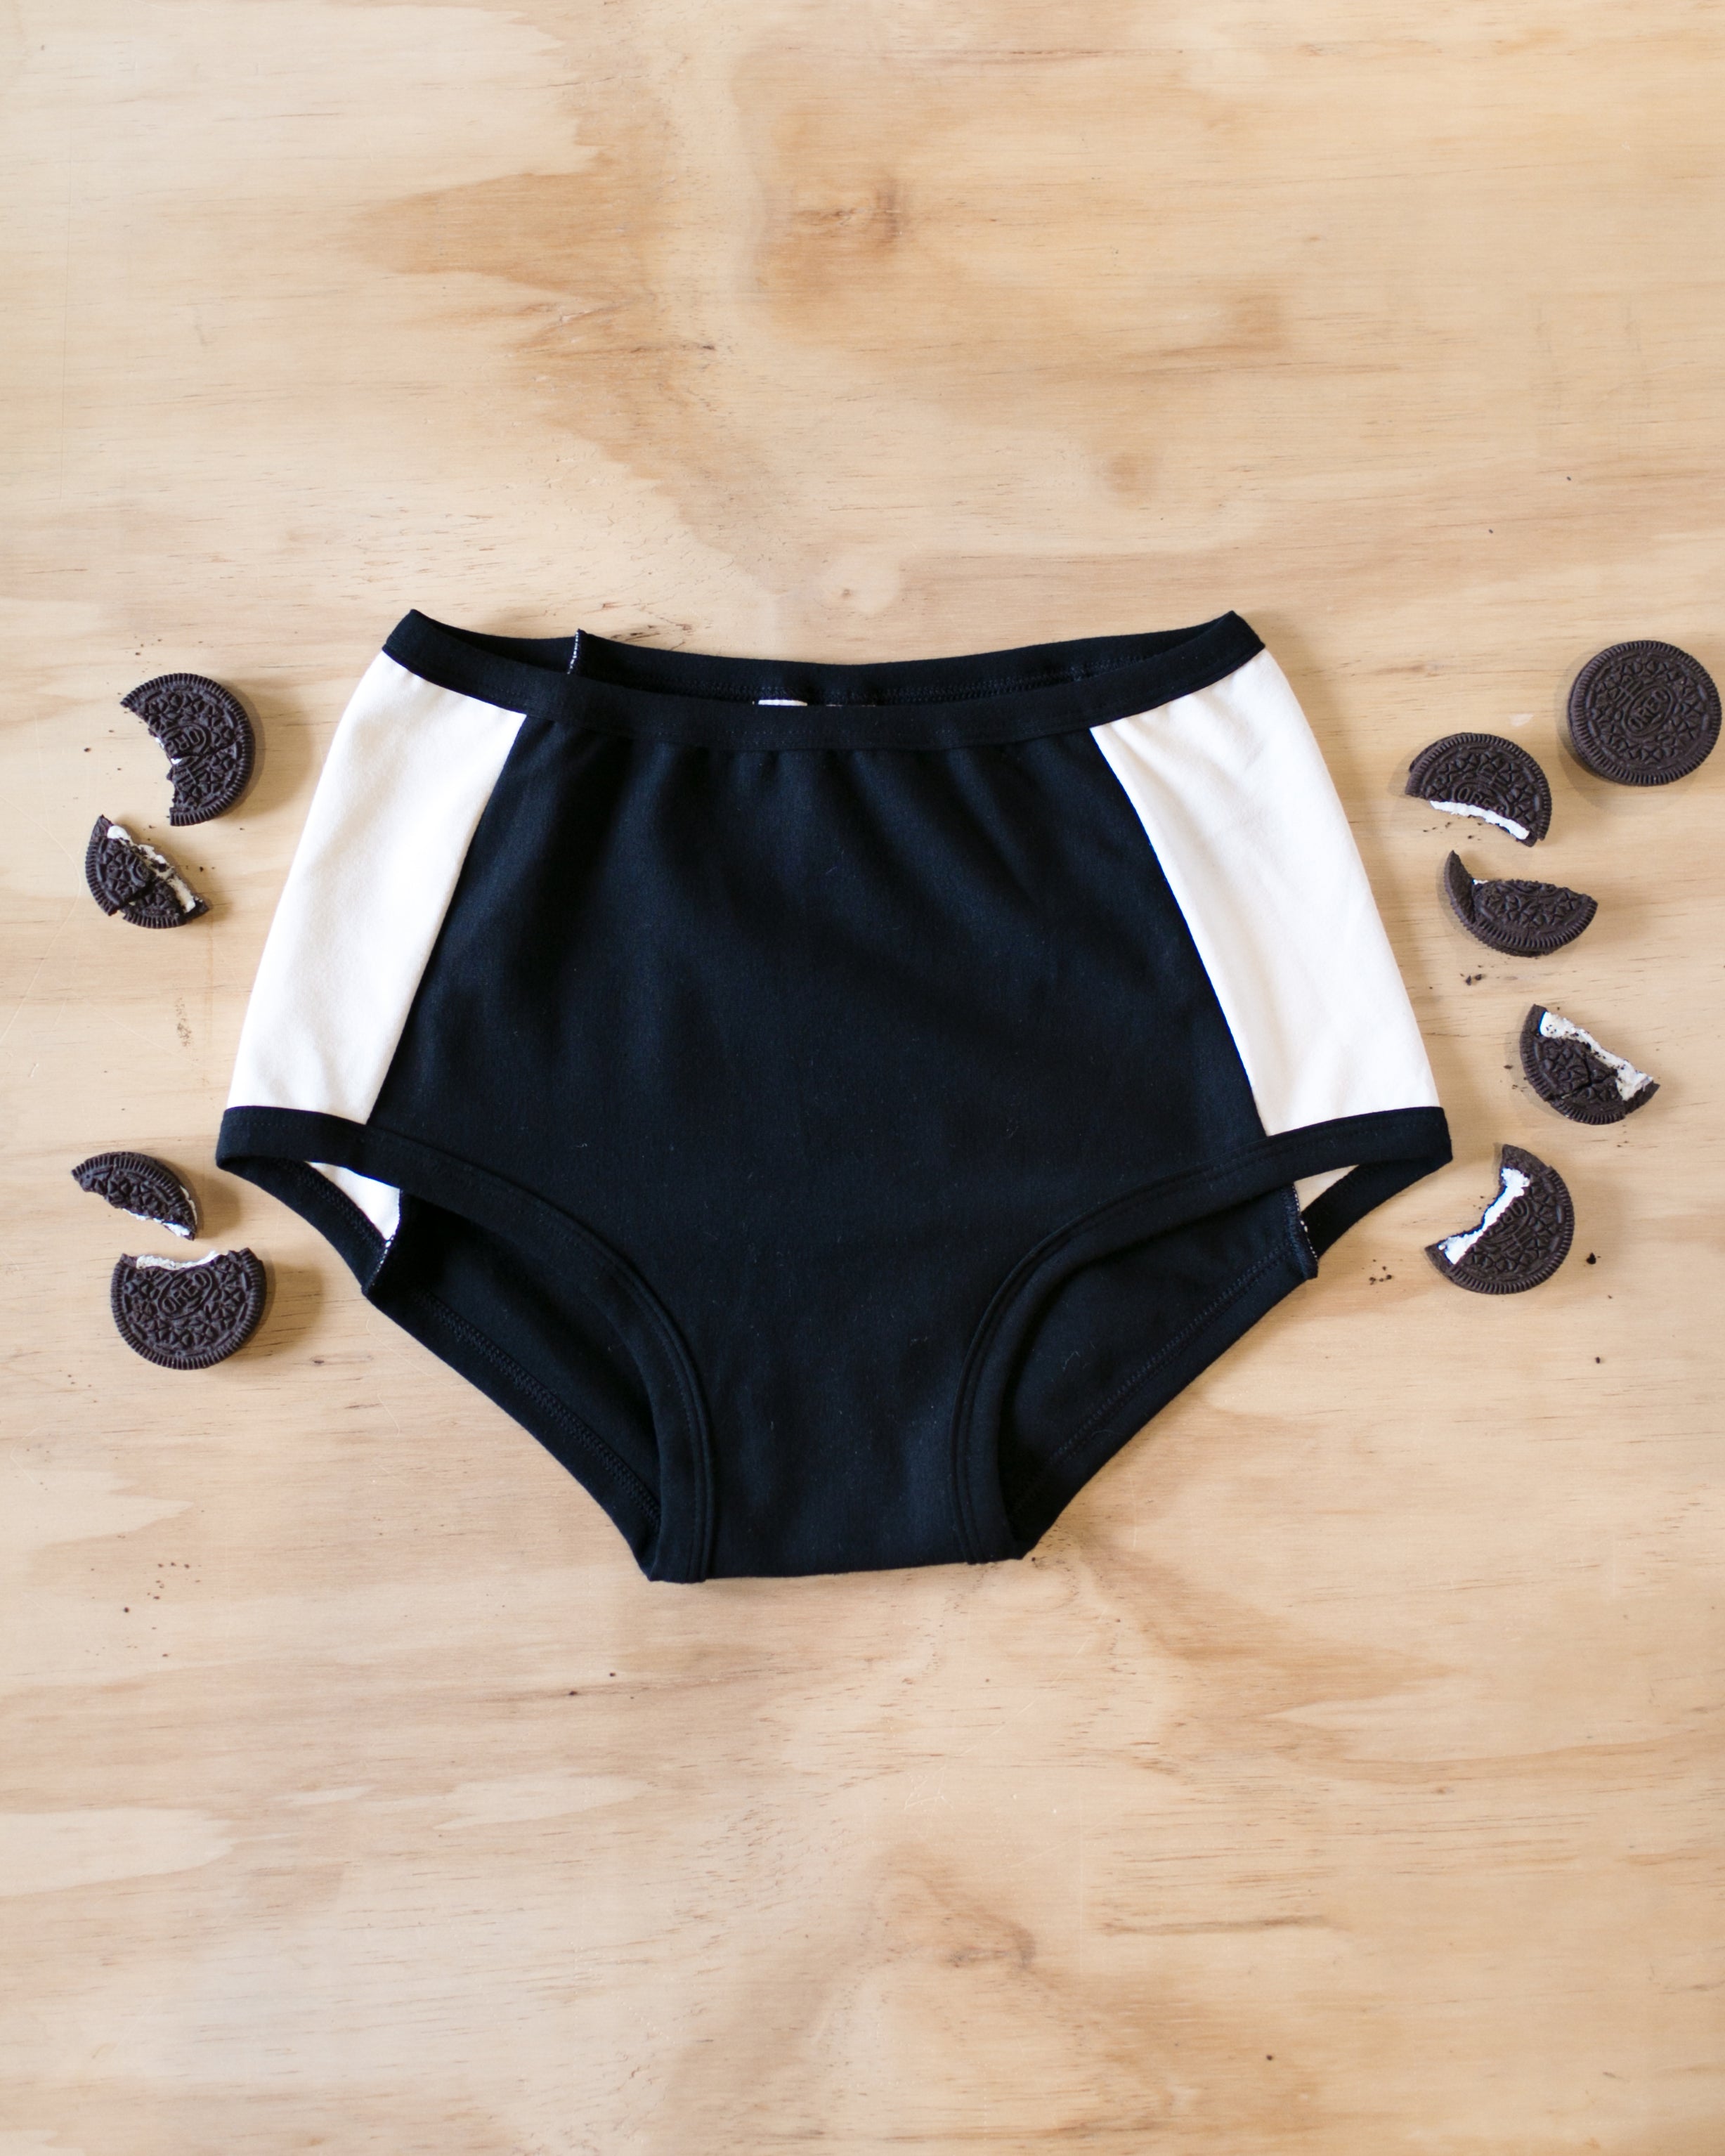 Flat lay on wood of our Cookies and Cream Panel Pants in the Original style with Oreo cookies surrounding it: black panel in the center and vanilla panels on both sides with black binding.